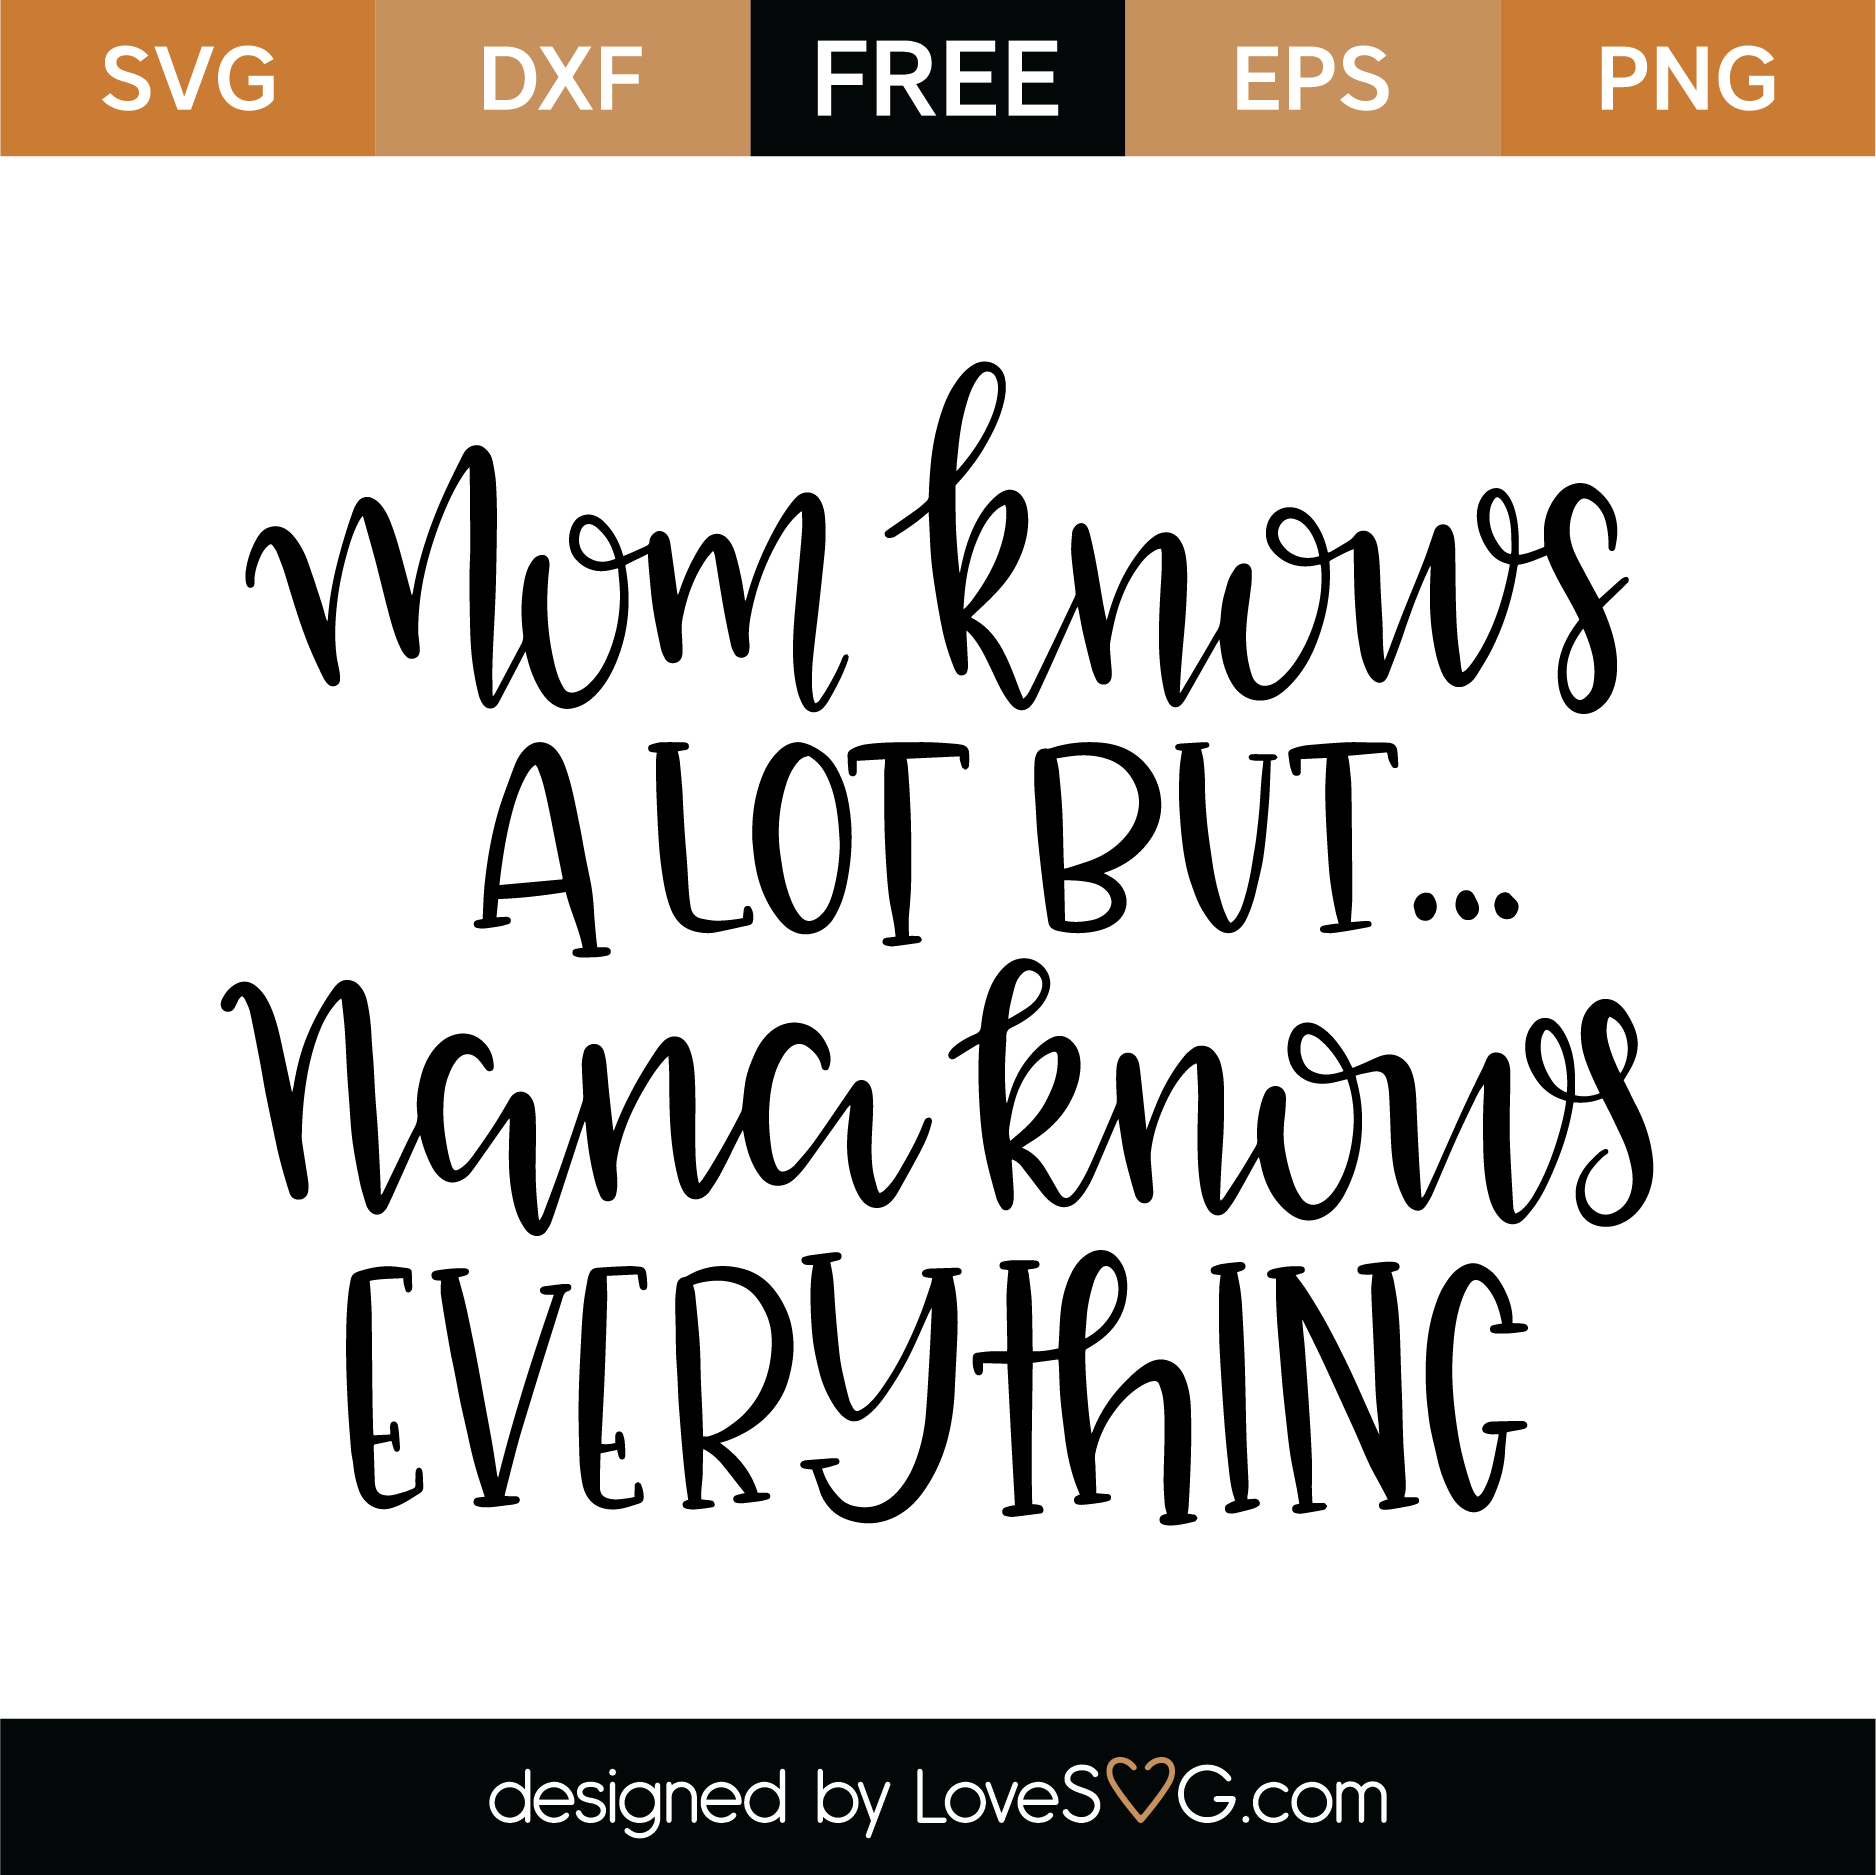 Download Mom Knows A Lot But Nana Knows Everything Svg Cut File Lovesvg Com